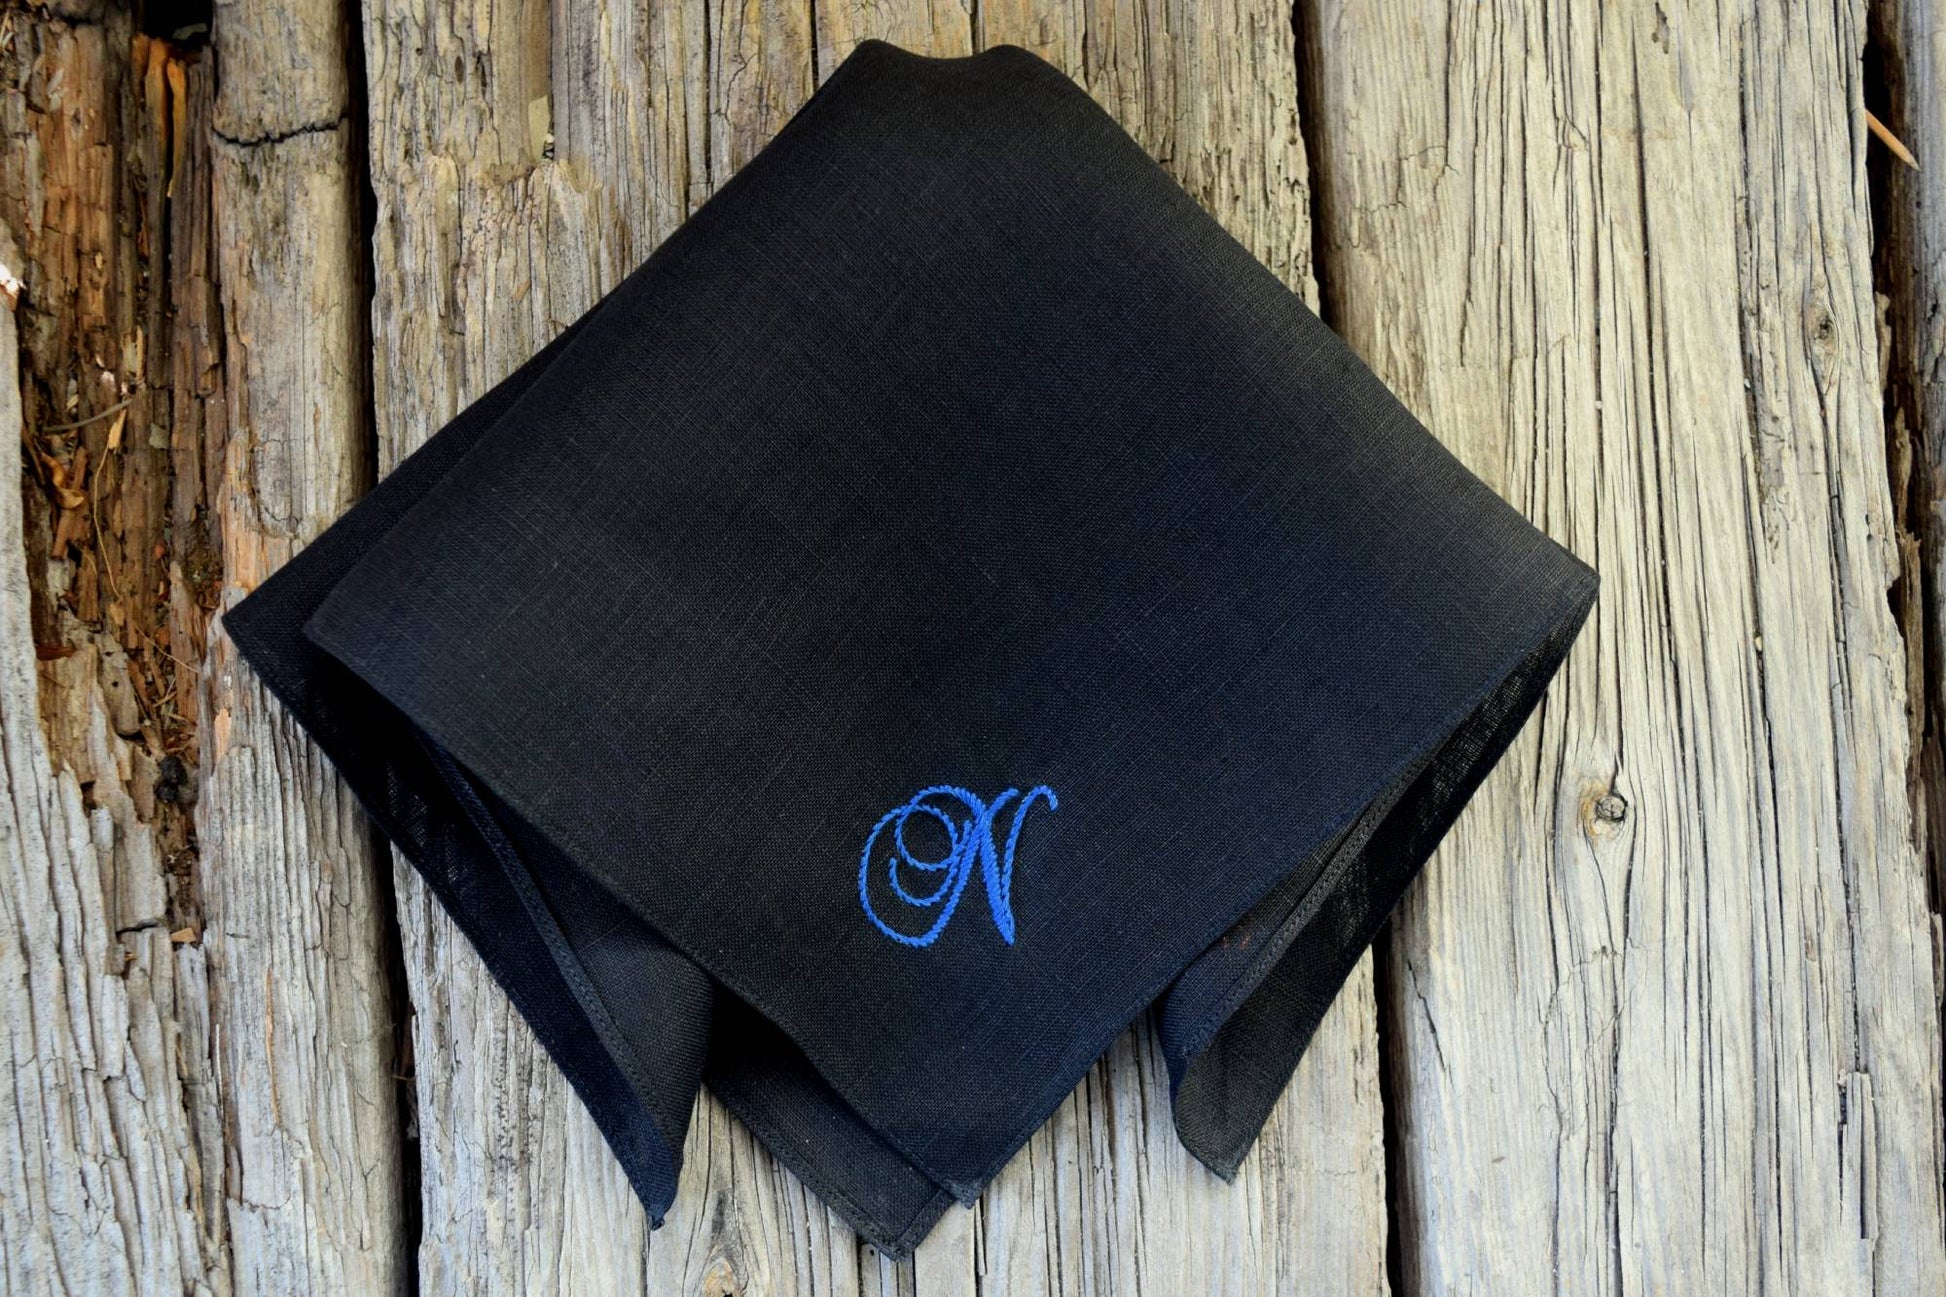 Black linen hankie on wood background hand embroidered with a letter N in blue